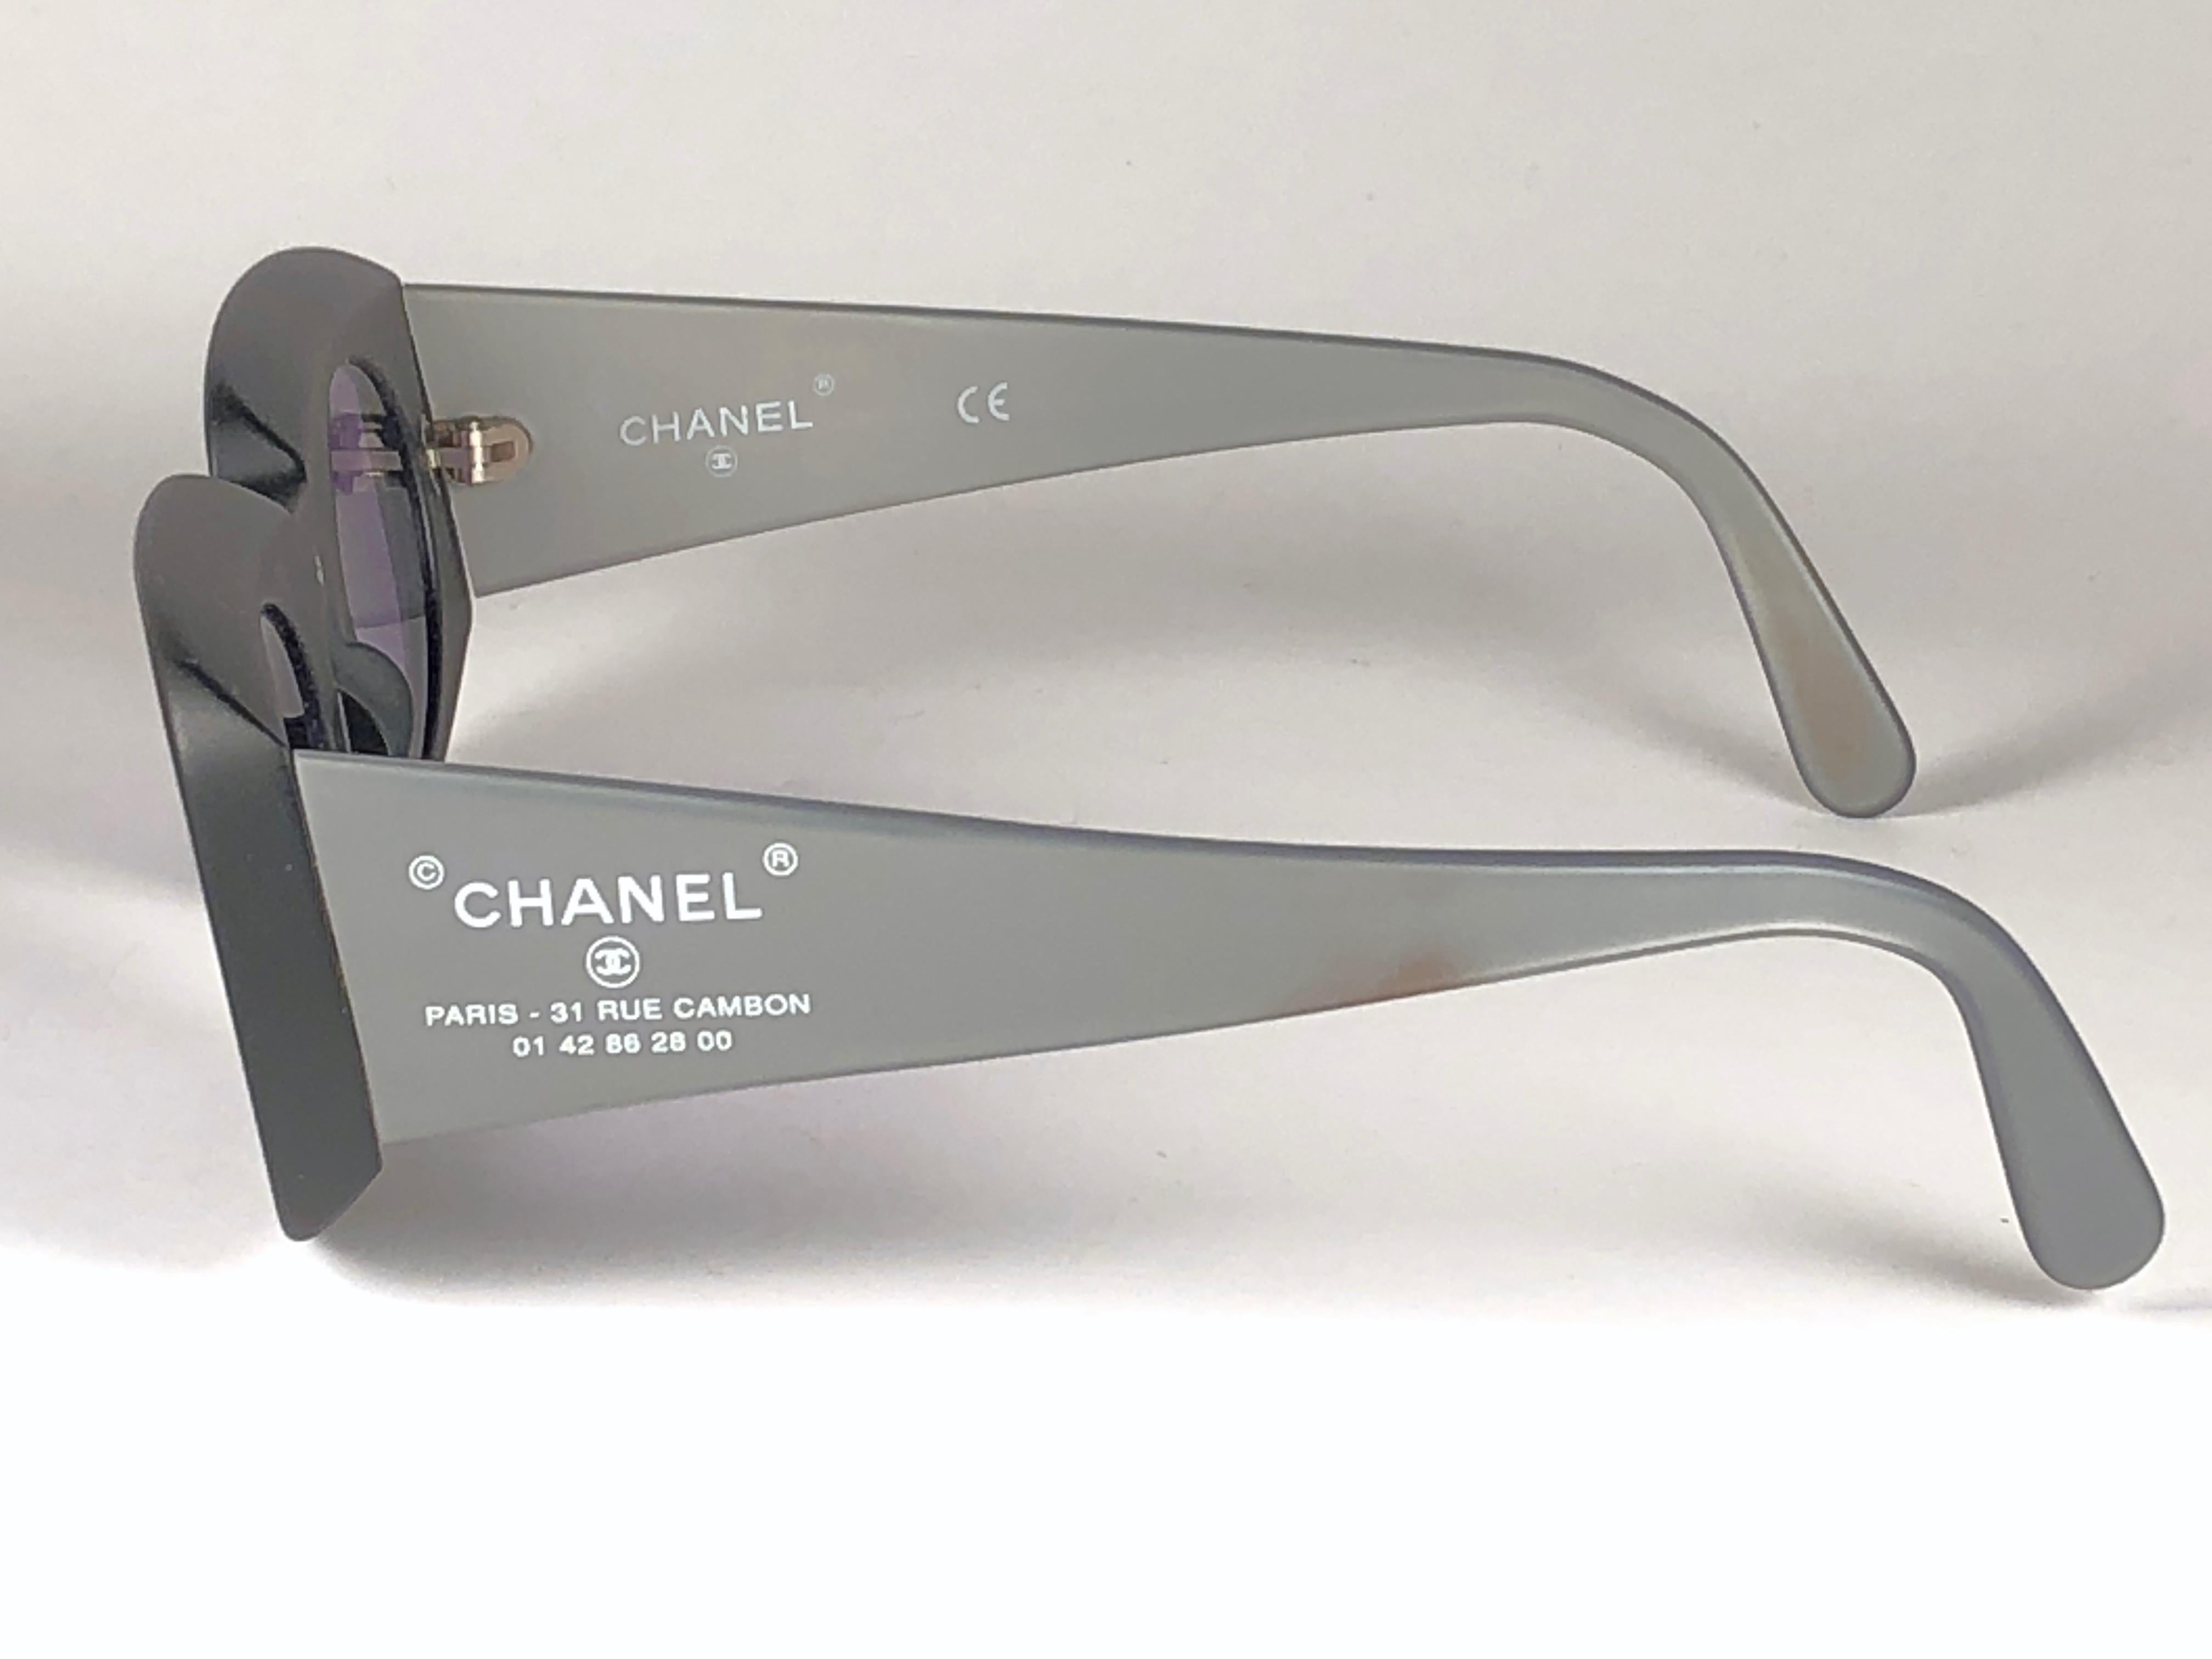 Chanel Vintage Camera Lens Black & Grey Sunglasses Made in Italy Collector Item 5